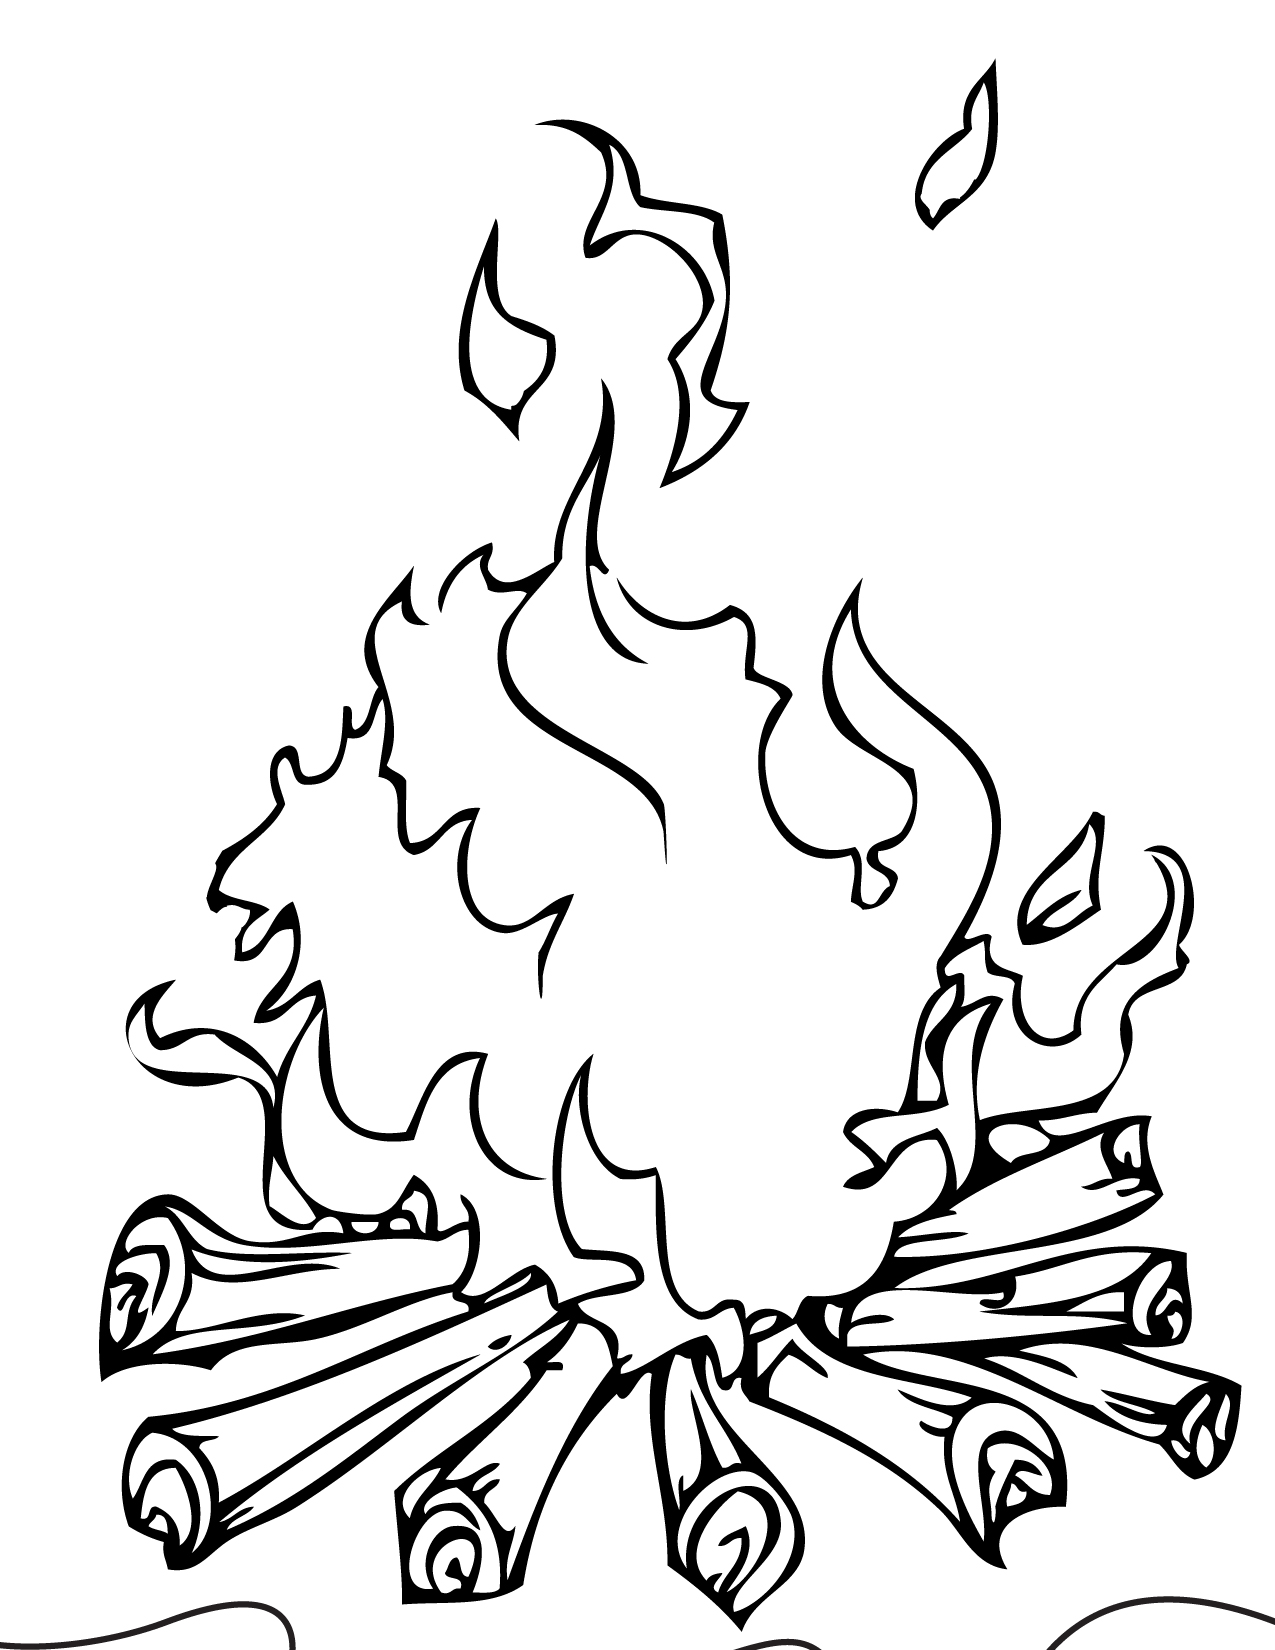 Campfire coloring #6, Download drawings